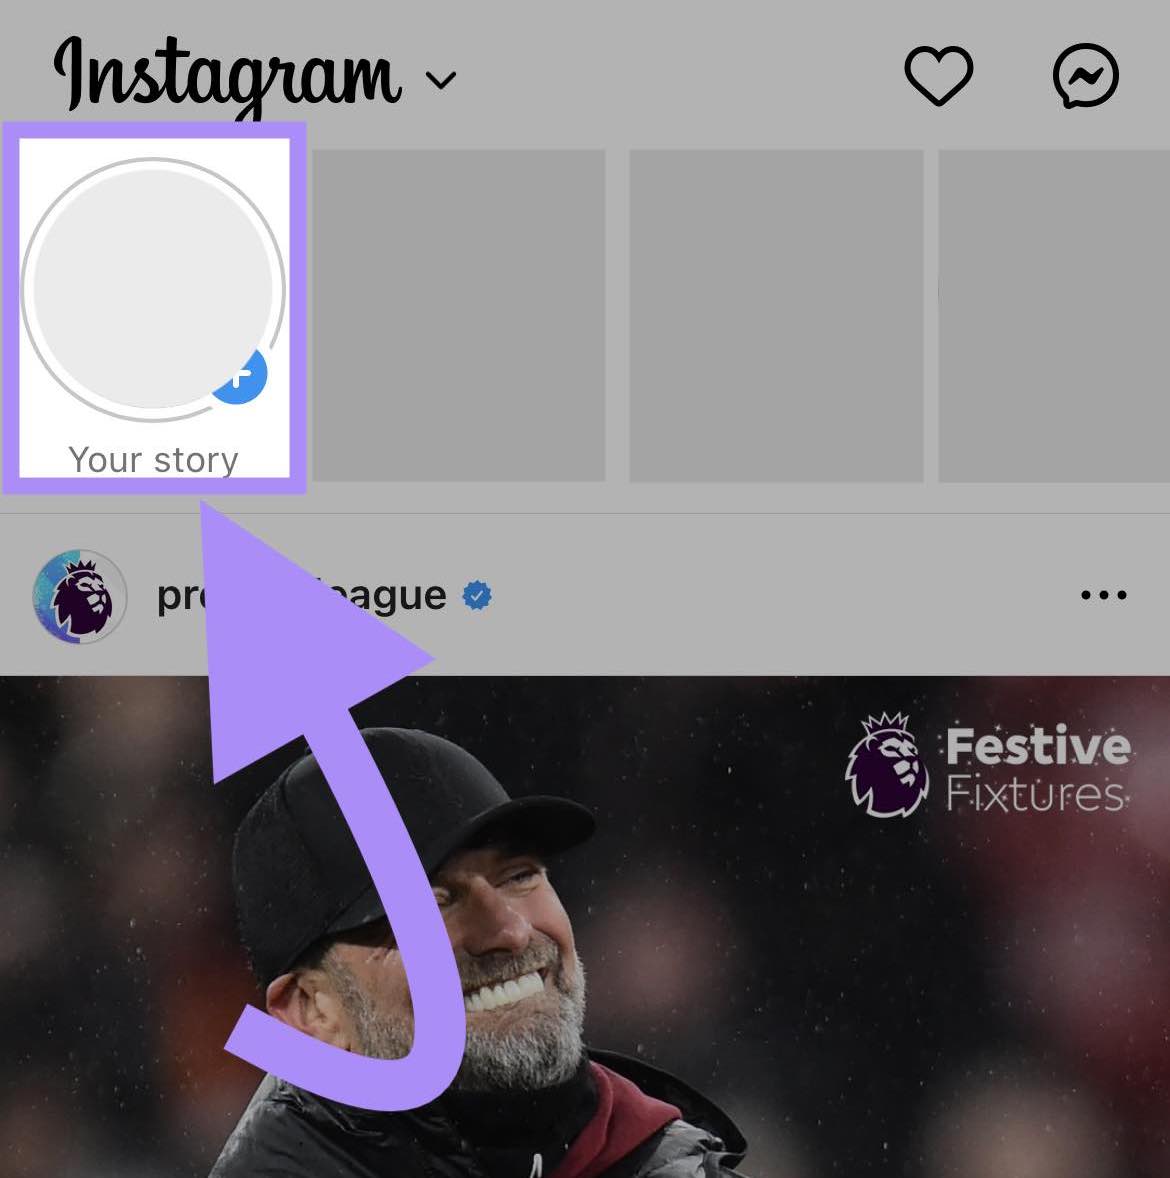 “Your story” with a profile image highlighted in Instagram app